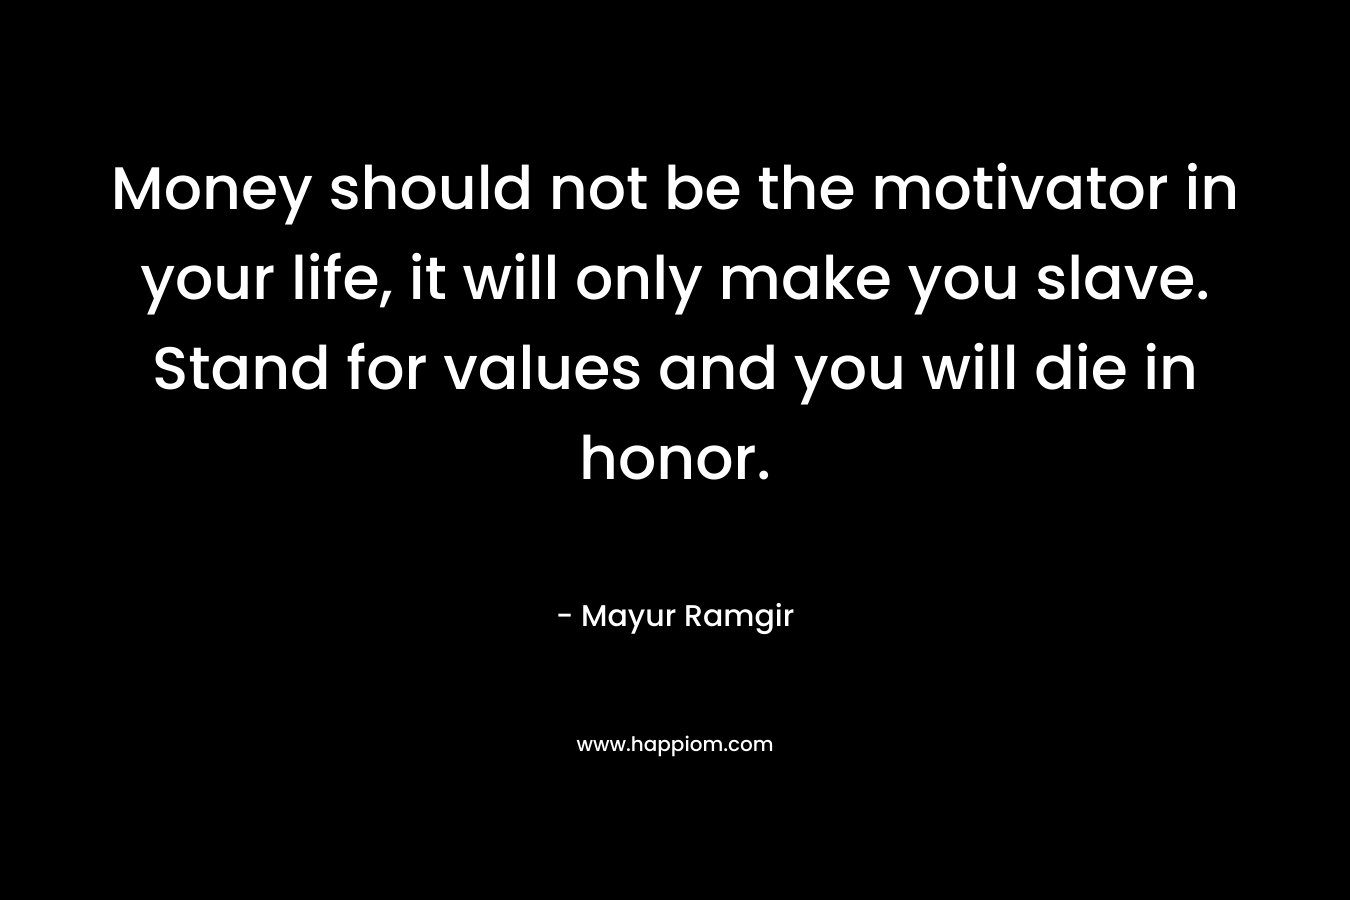 Money should not be the motivator in your life, it will only make you slave. Stand for values and you will die in honor.